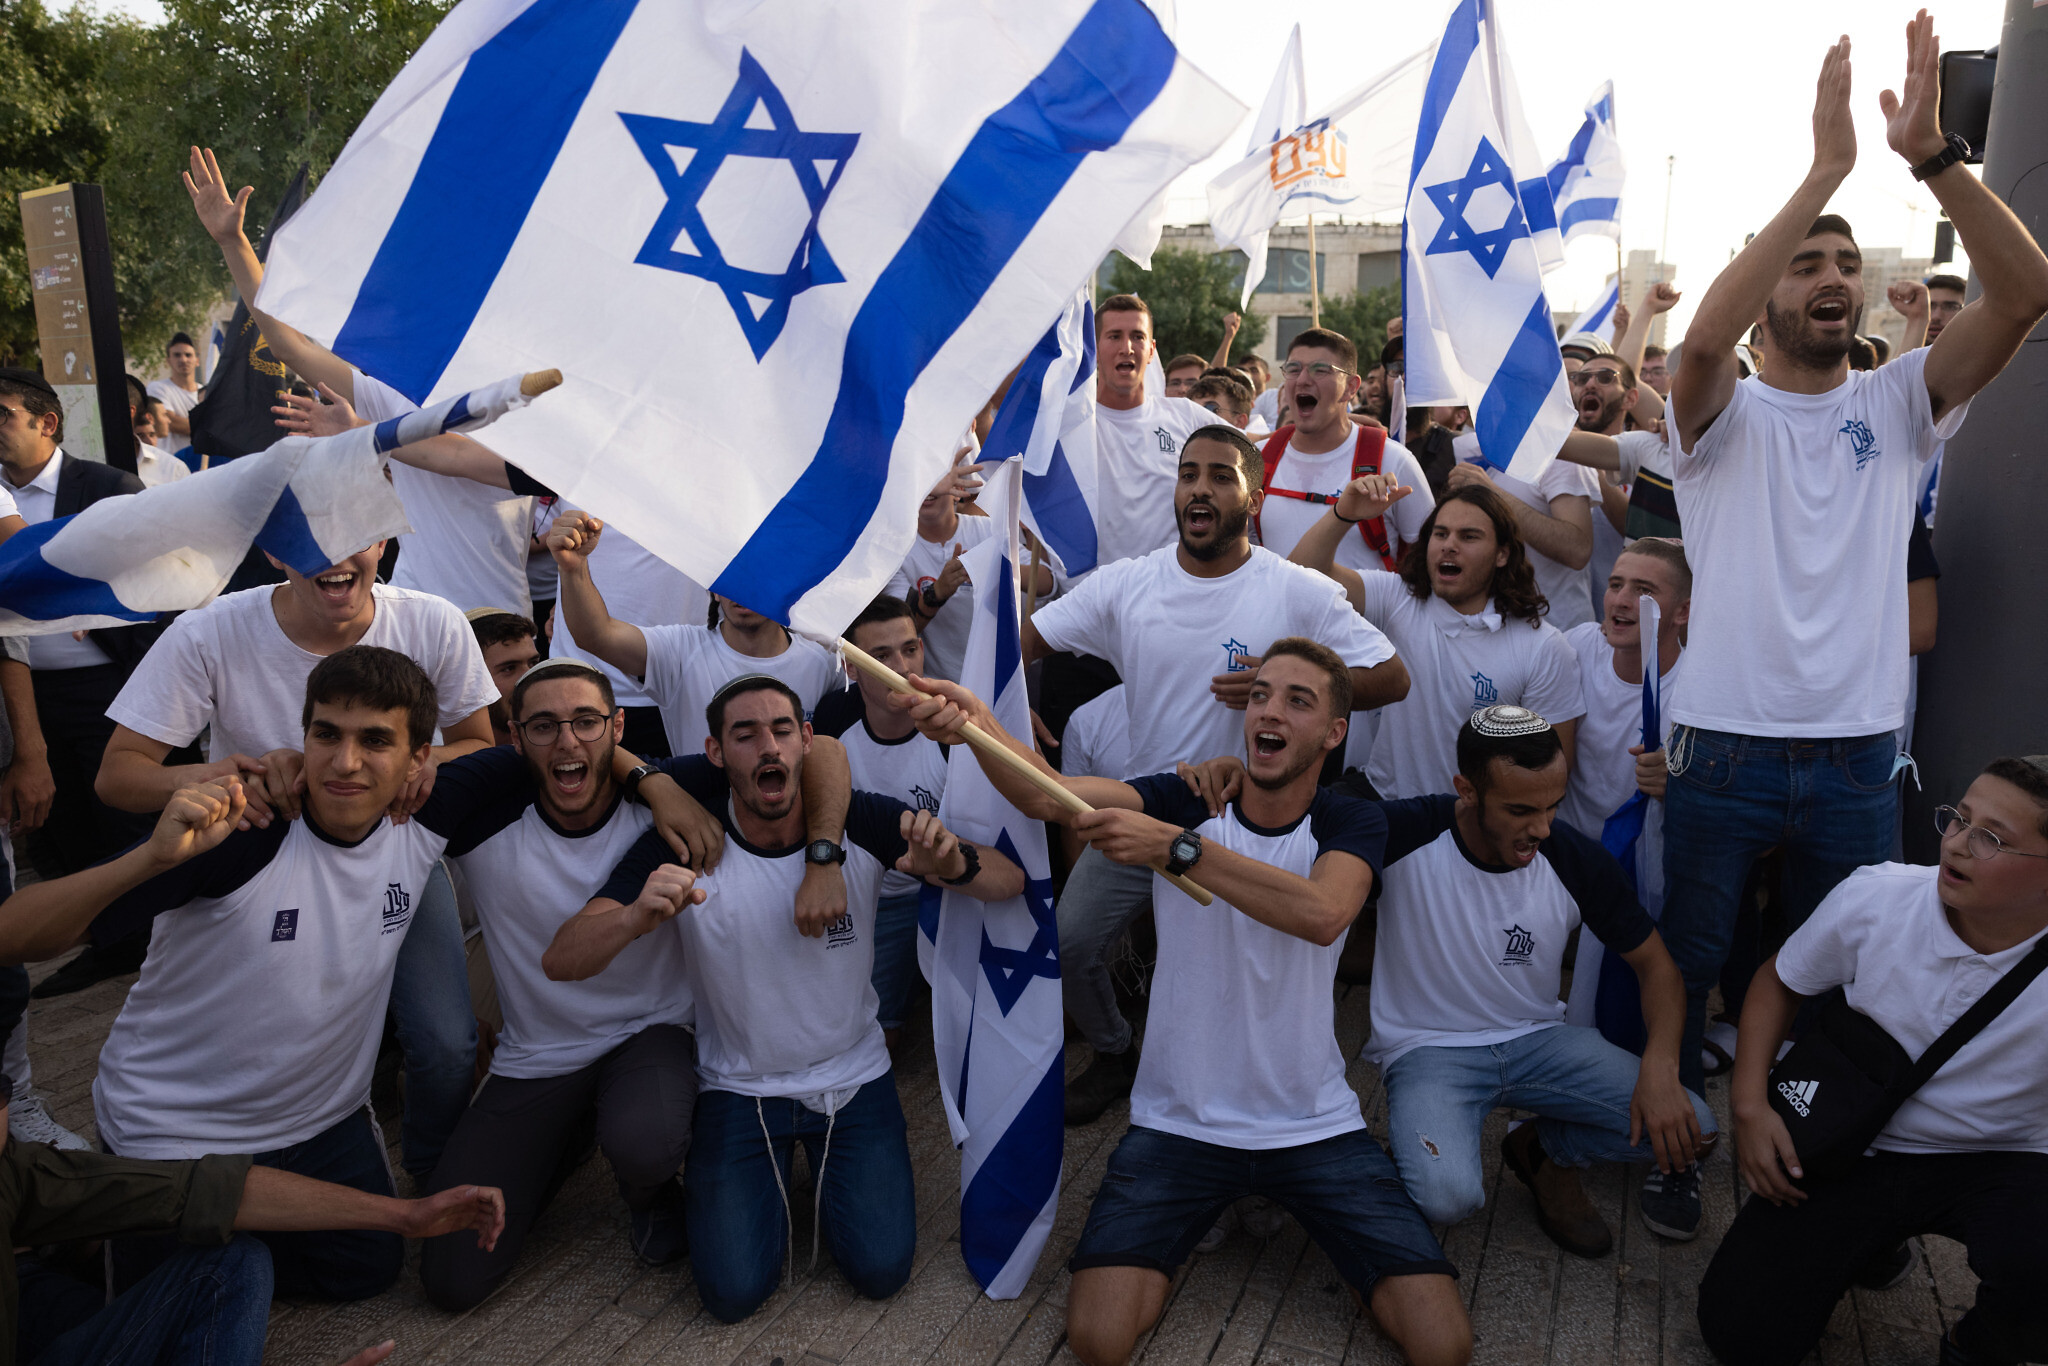 Police nix contentious Jerusalem flag march, angering nationalists | The  Times of Israel